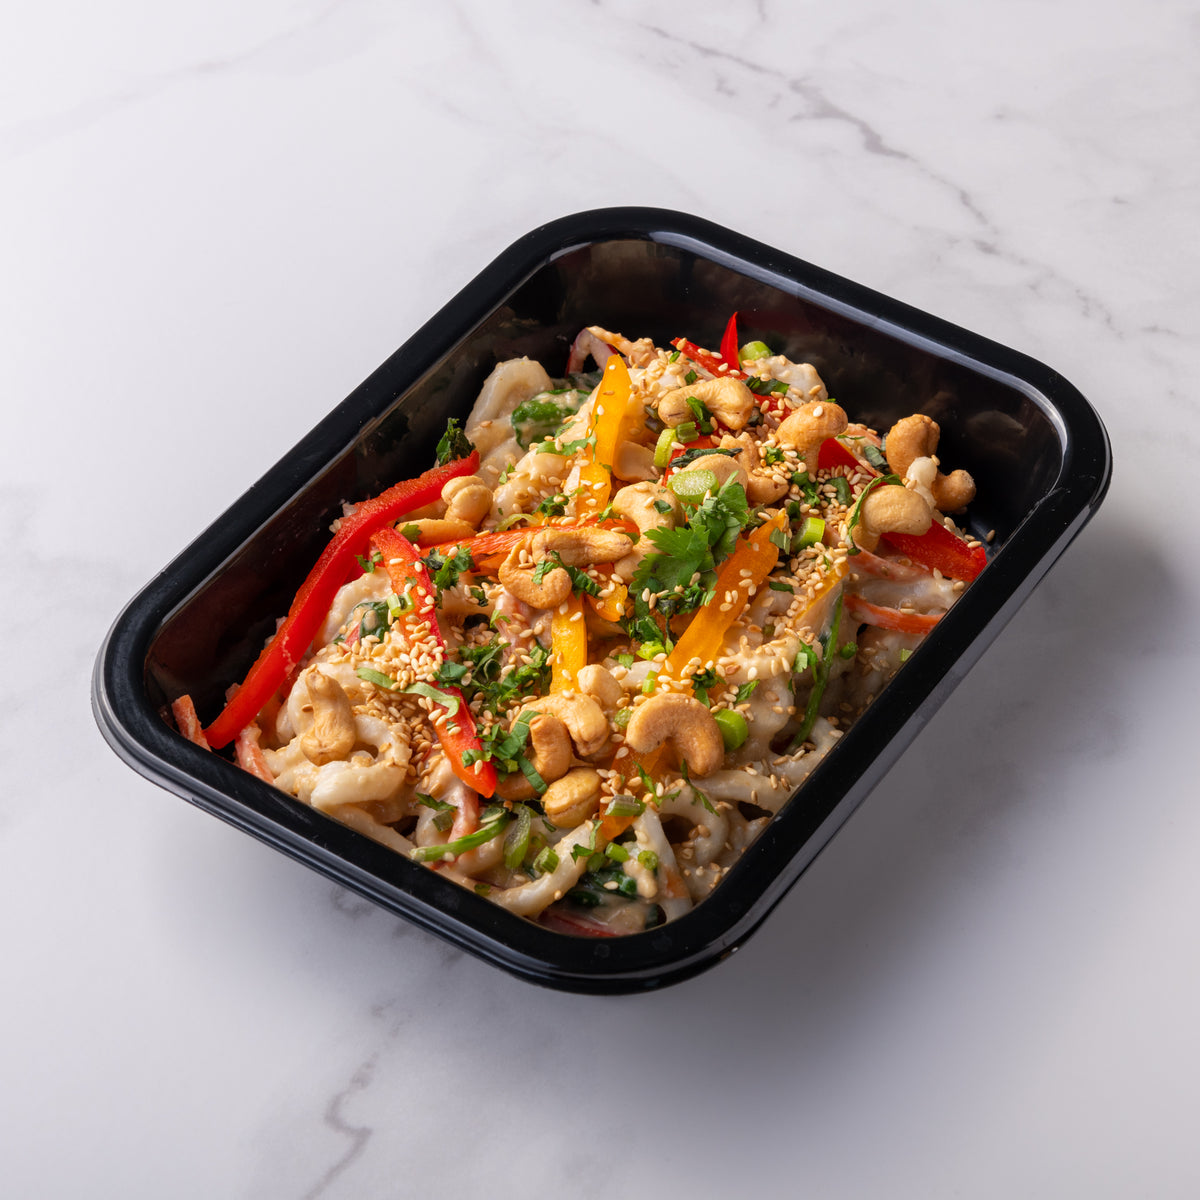 Sriracha Spiced Cashew and Udon Noodle Stir-fry